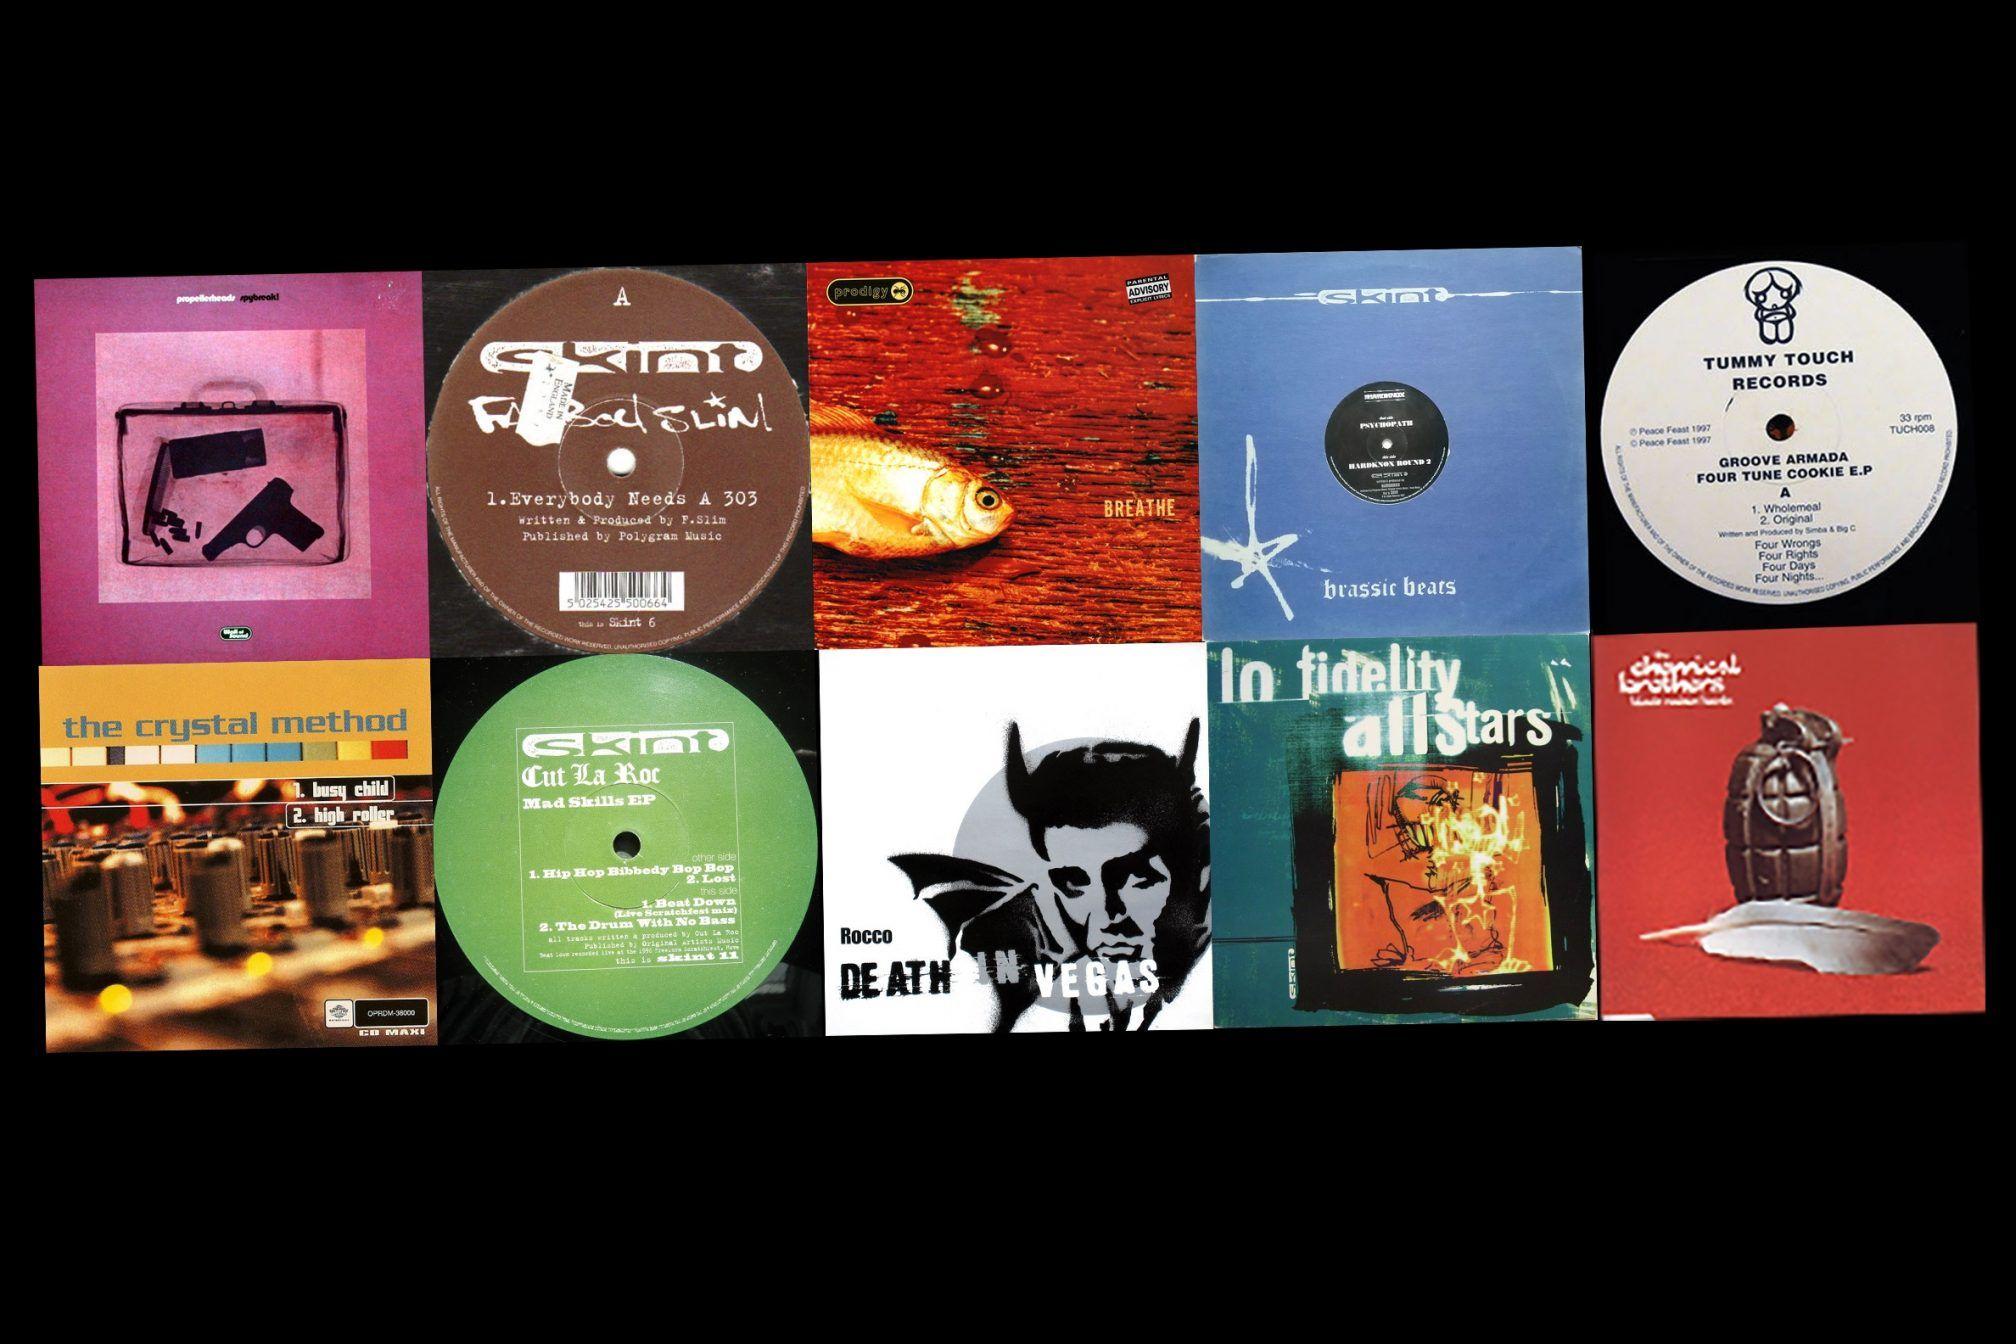 Glowing Beats Logo - The 10 best big beat tracks released pre-'98 - Lists - Mixmag